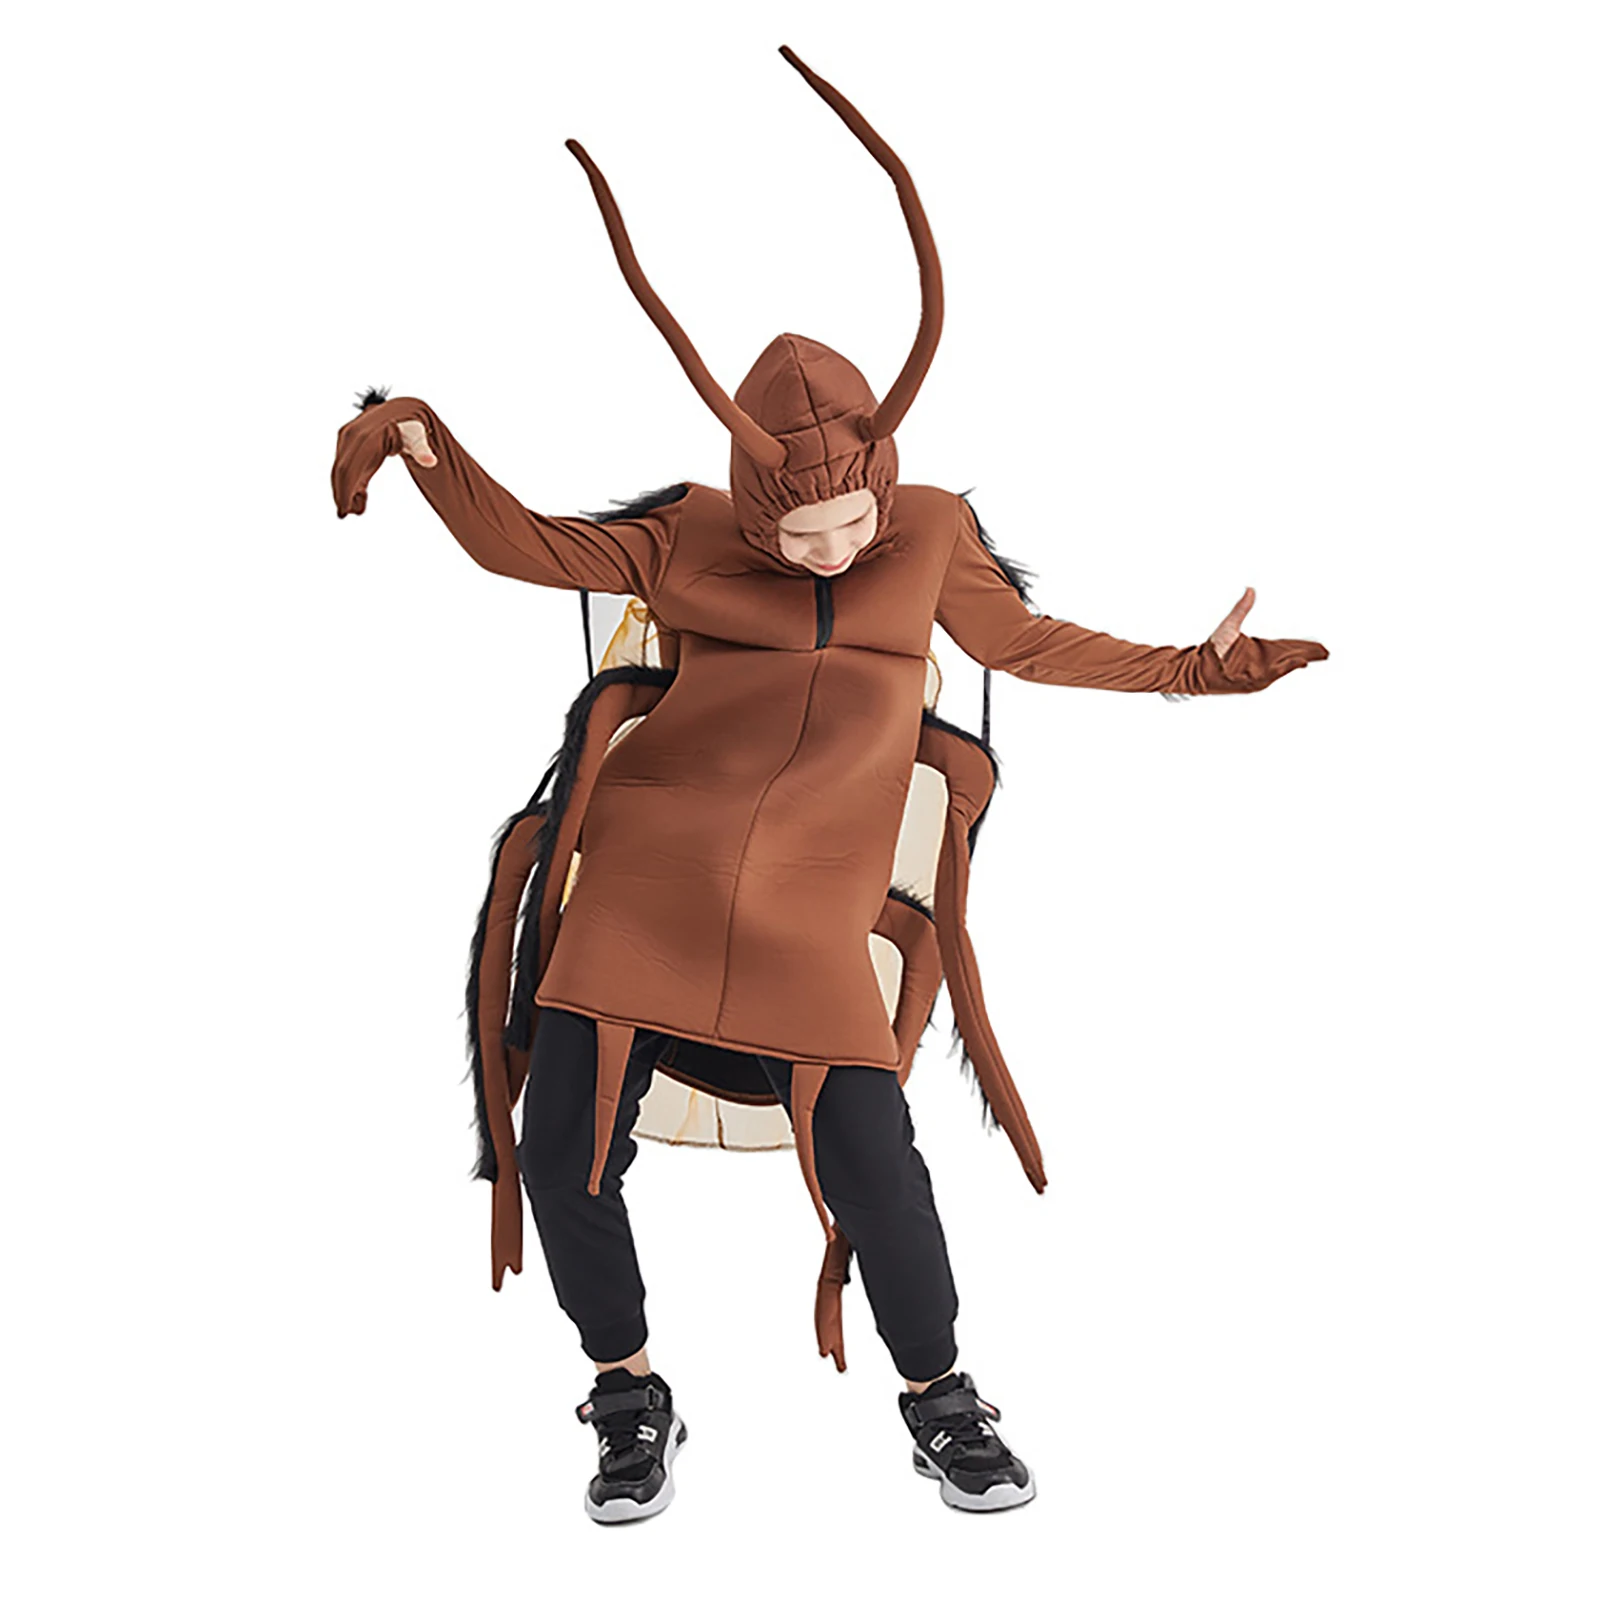 

Cockroach Costume For Kids Funny Halloween Costumes Cockroach Bodysuit Gross Dress Up Fake Outfit For Masquerade Role Pretend